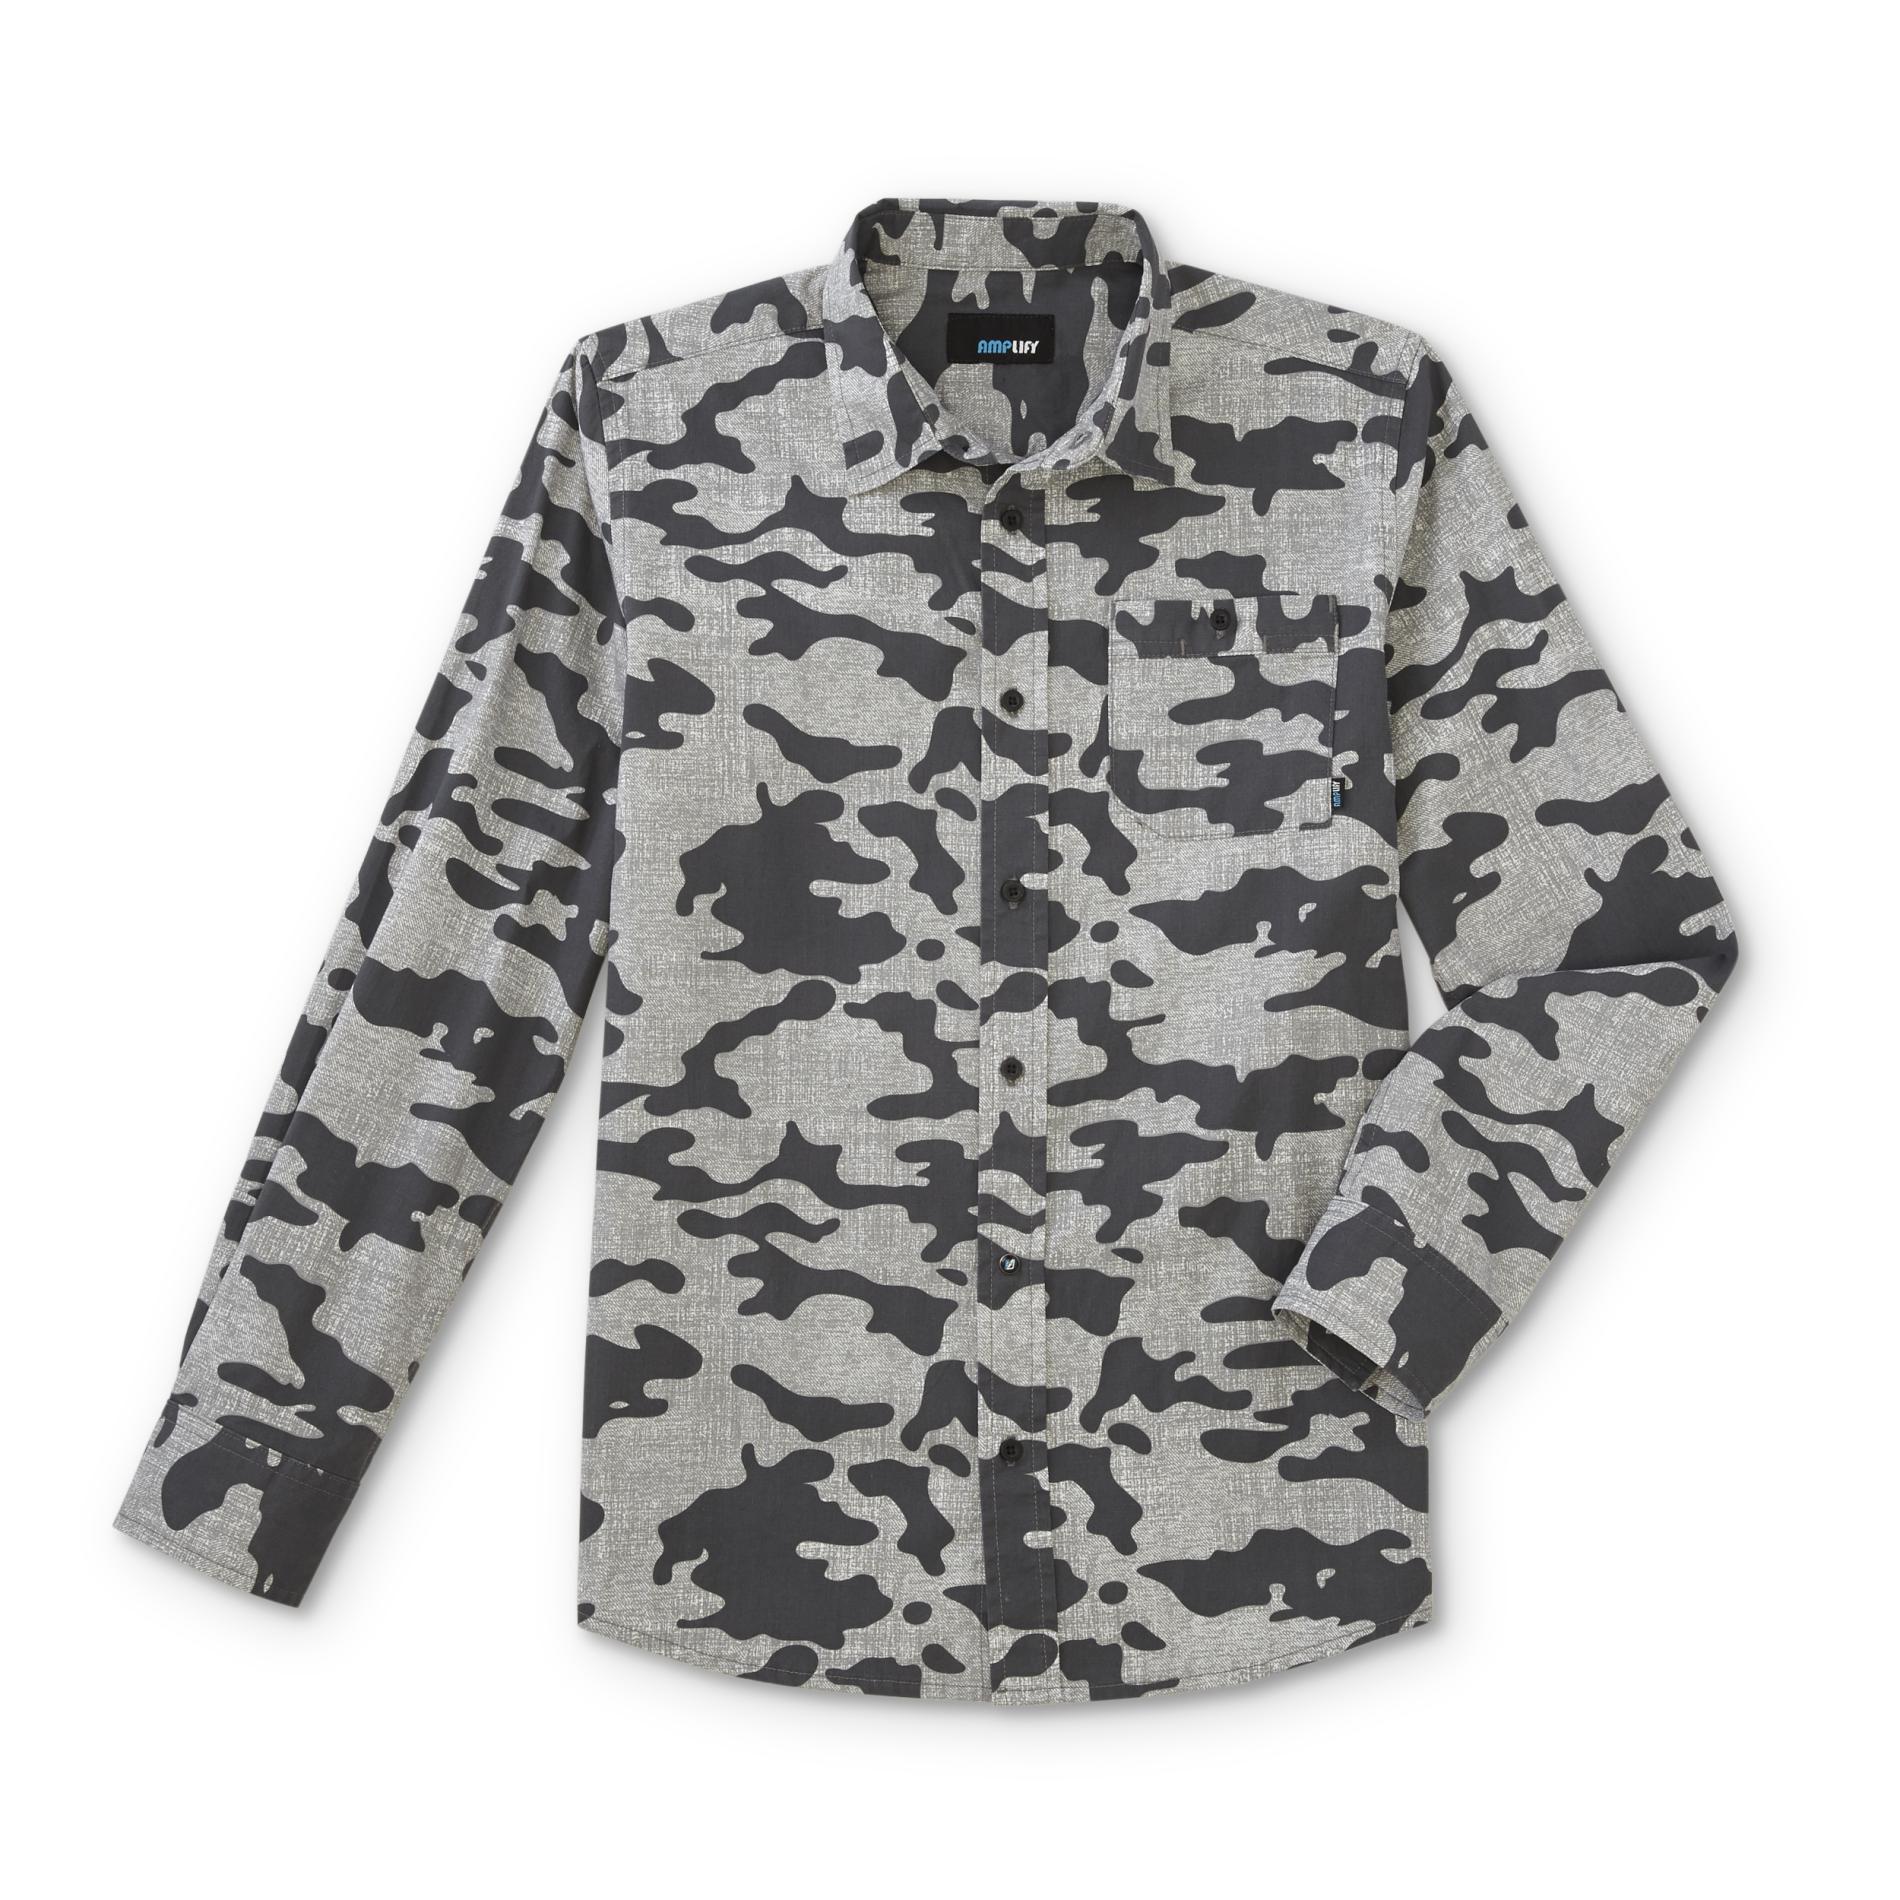 Amplify Boys' Button-Front Shirt - Camouflage